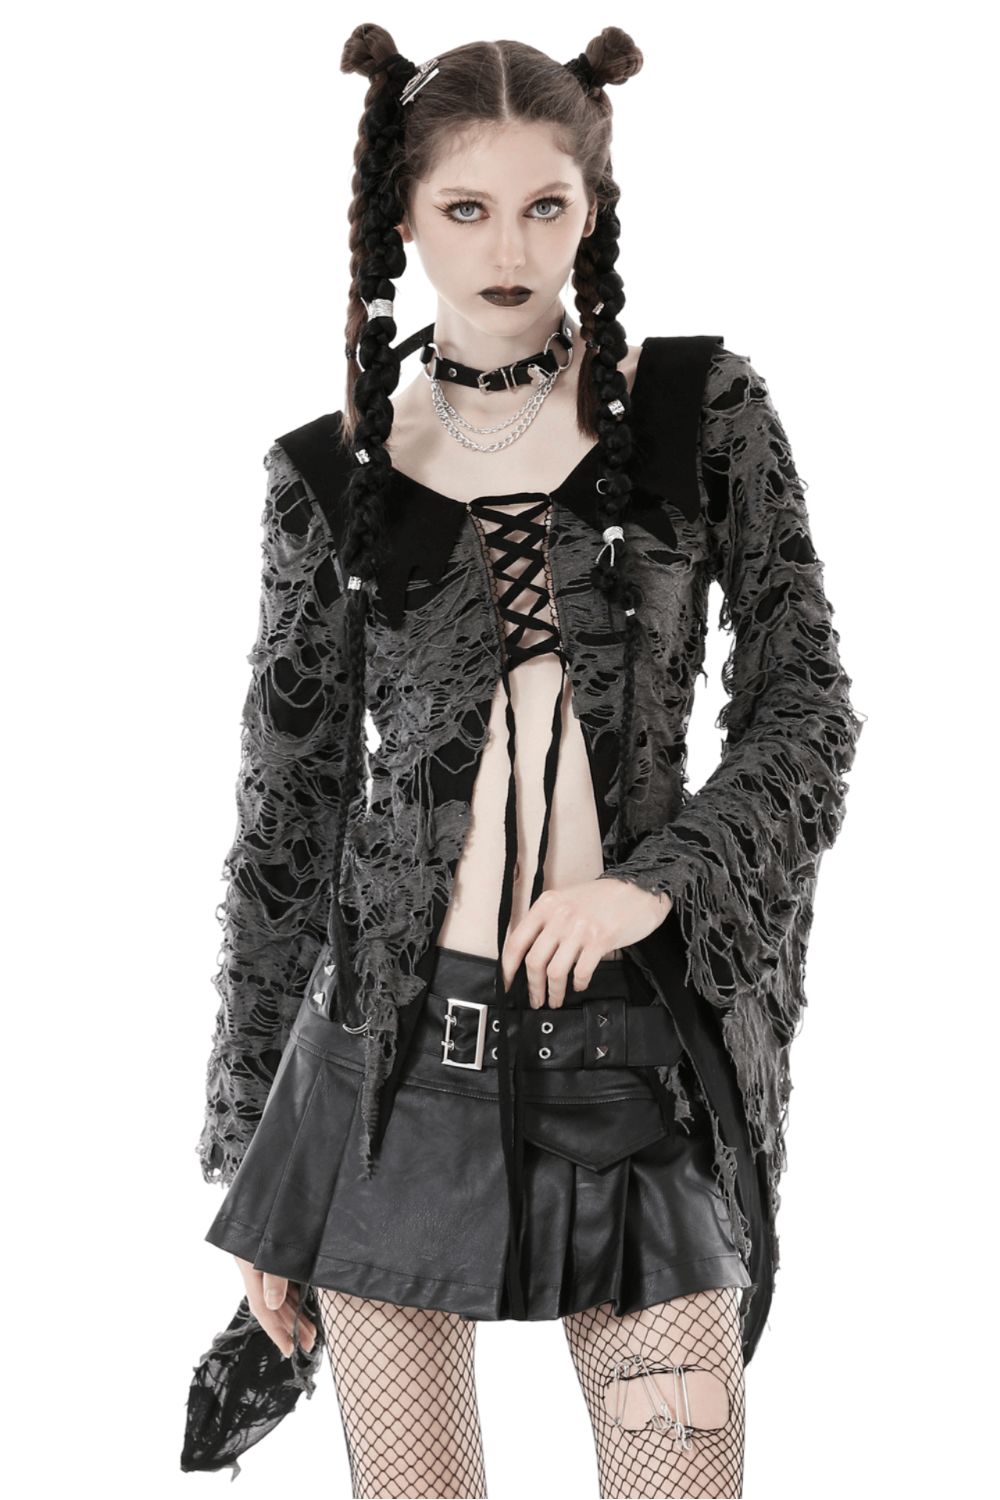 Gothic Women's Lace-Up Shredded Top with Bell Sleeves